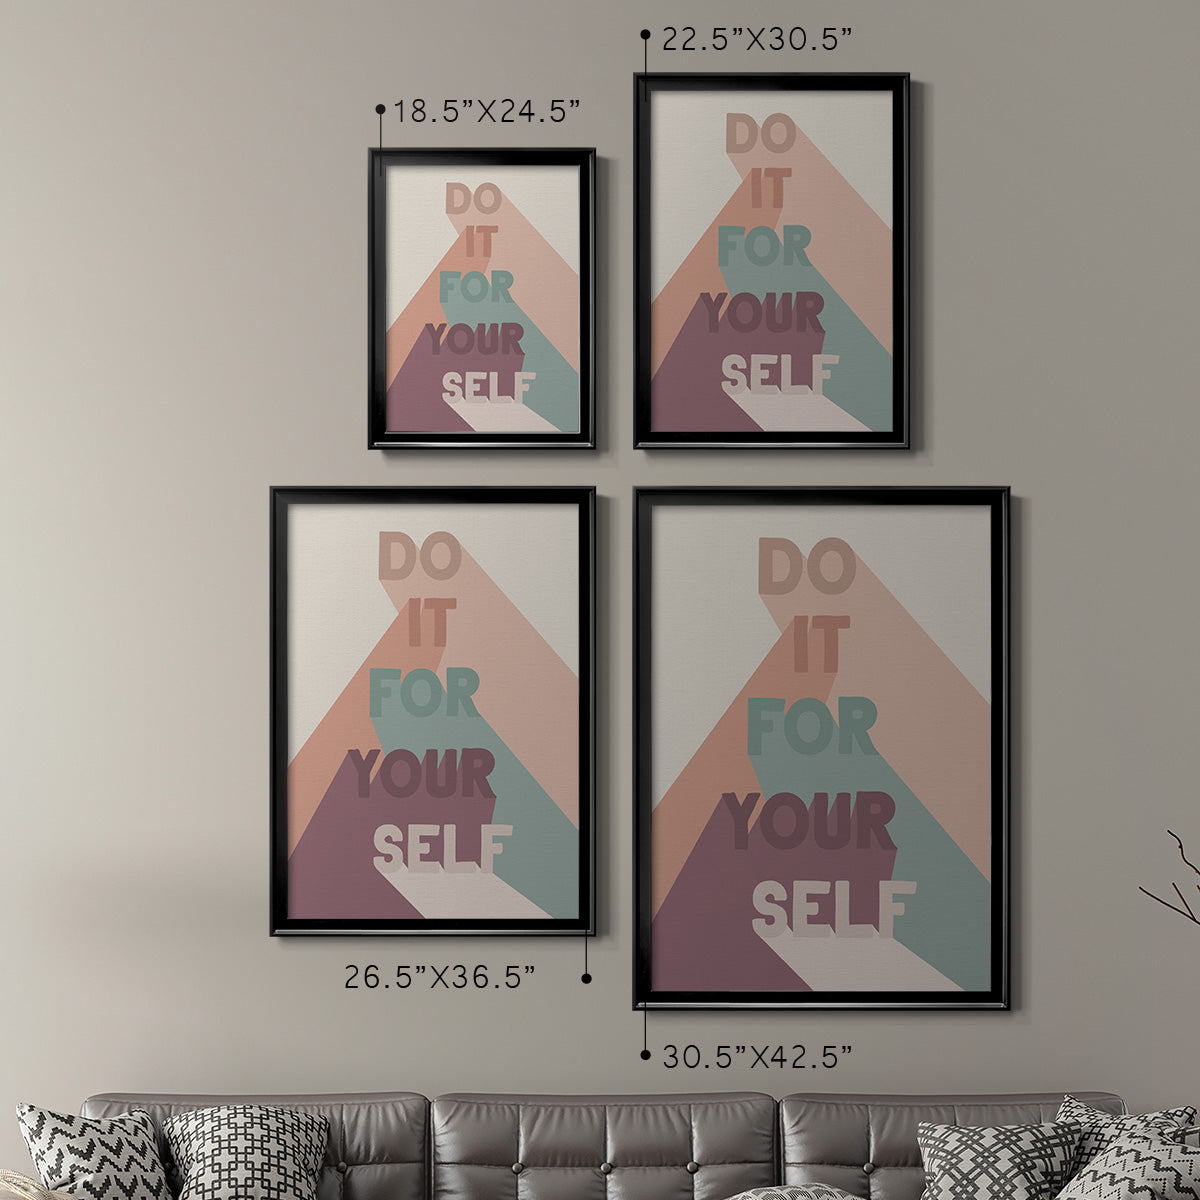 For Yourself Premium Framed Print - Ready to Hang